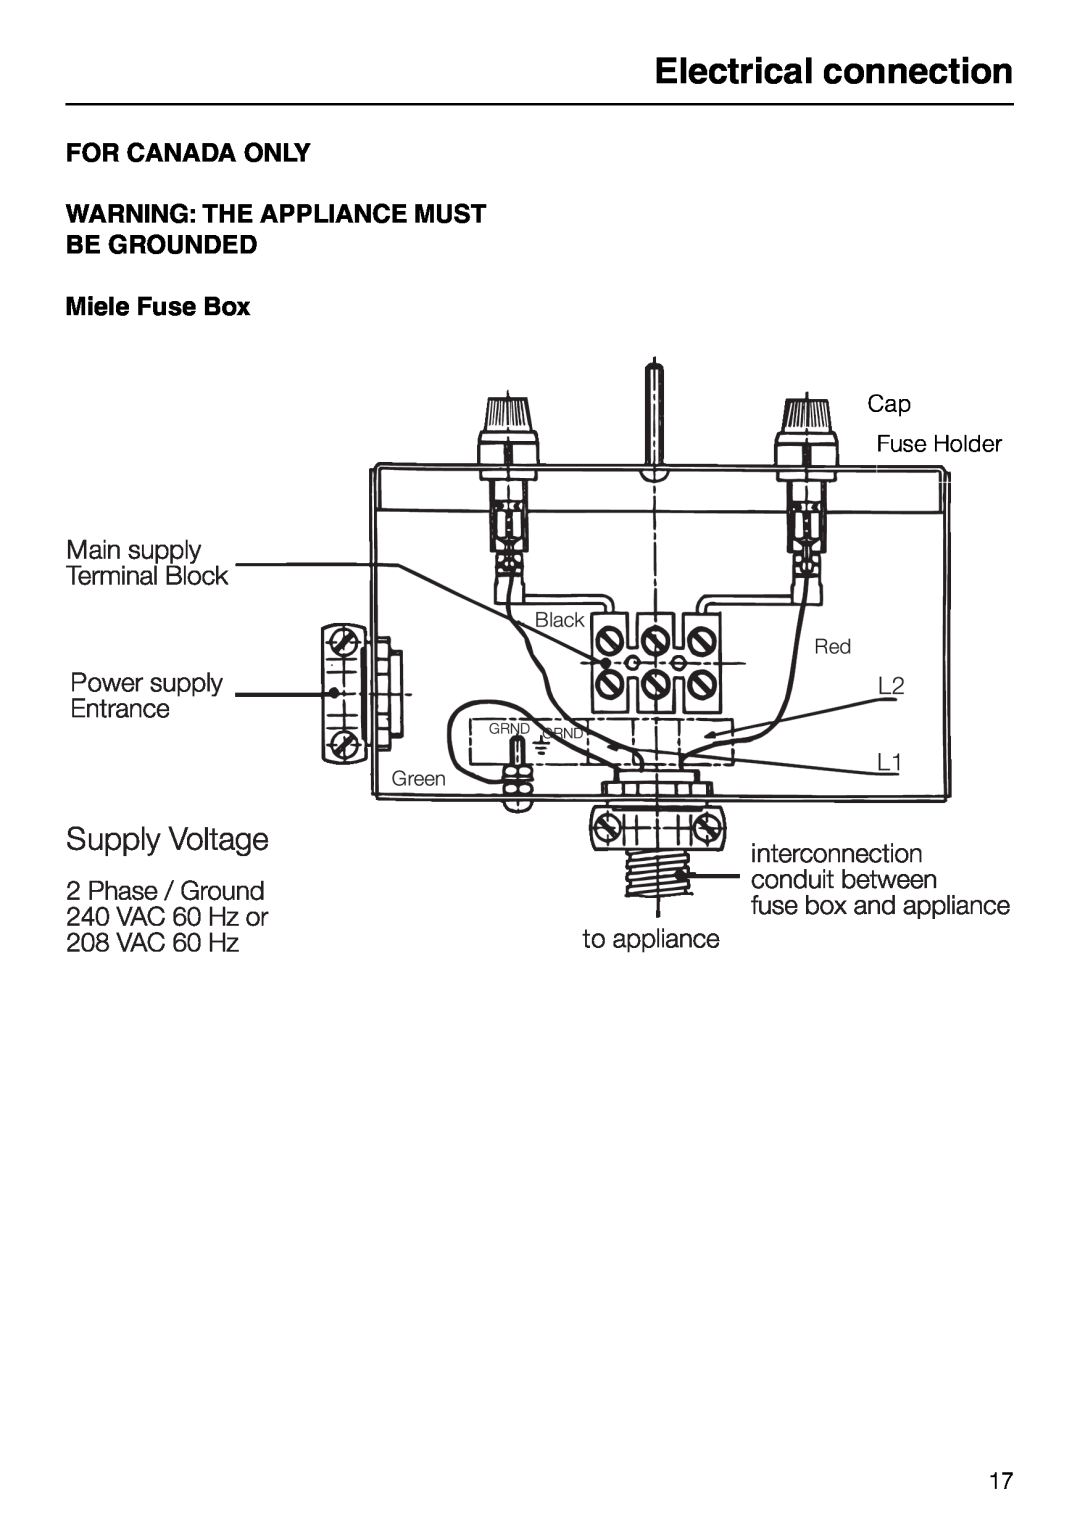 Miele KM 92-2, KM82-2 manual FOR CANADA ONLY WARNING THE APPLIANCE MUST BE GROUNDED Miele Fuse Box, Electrical connection 